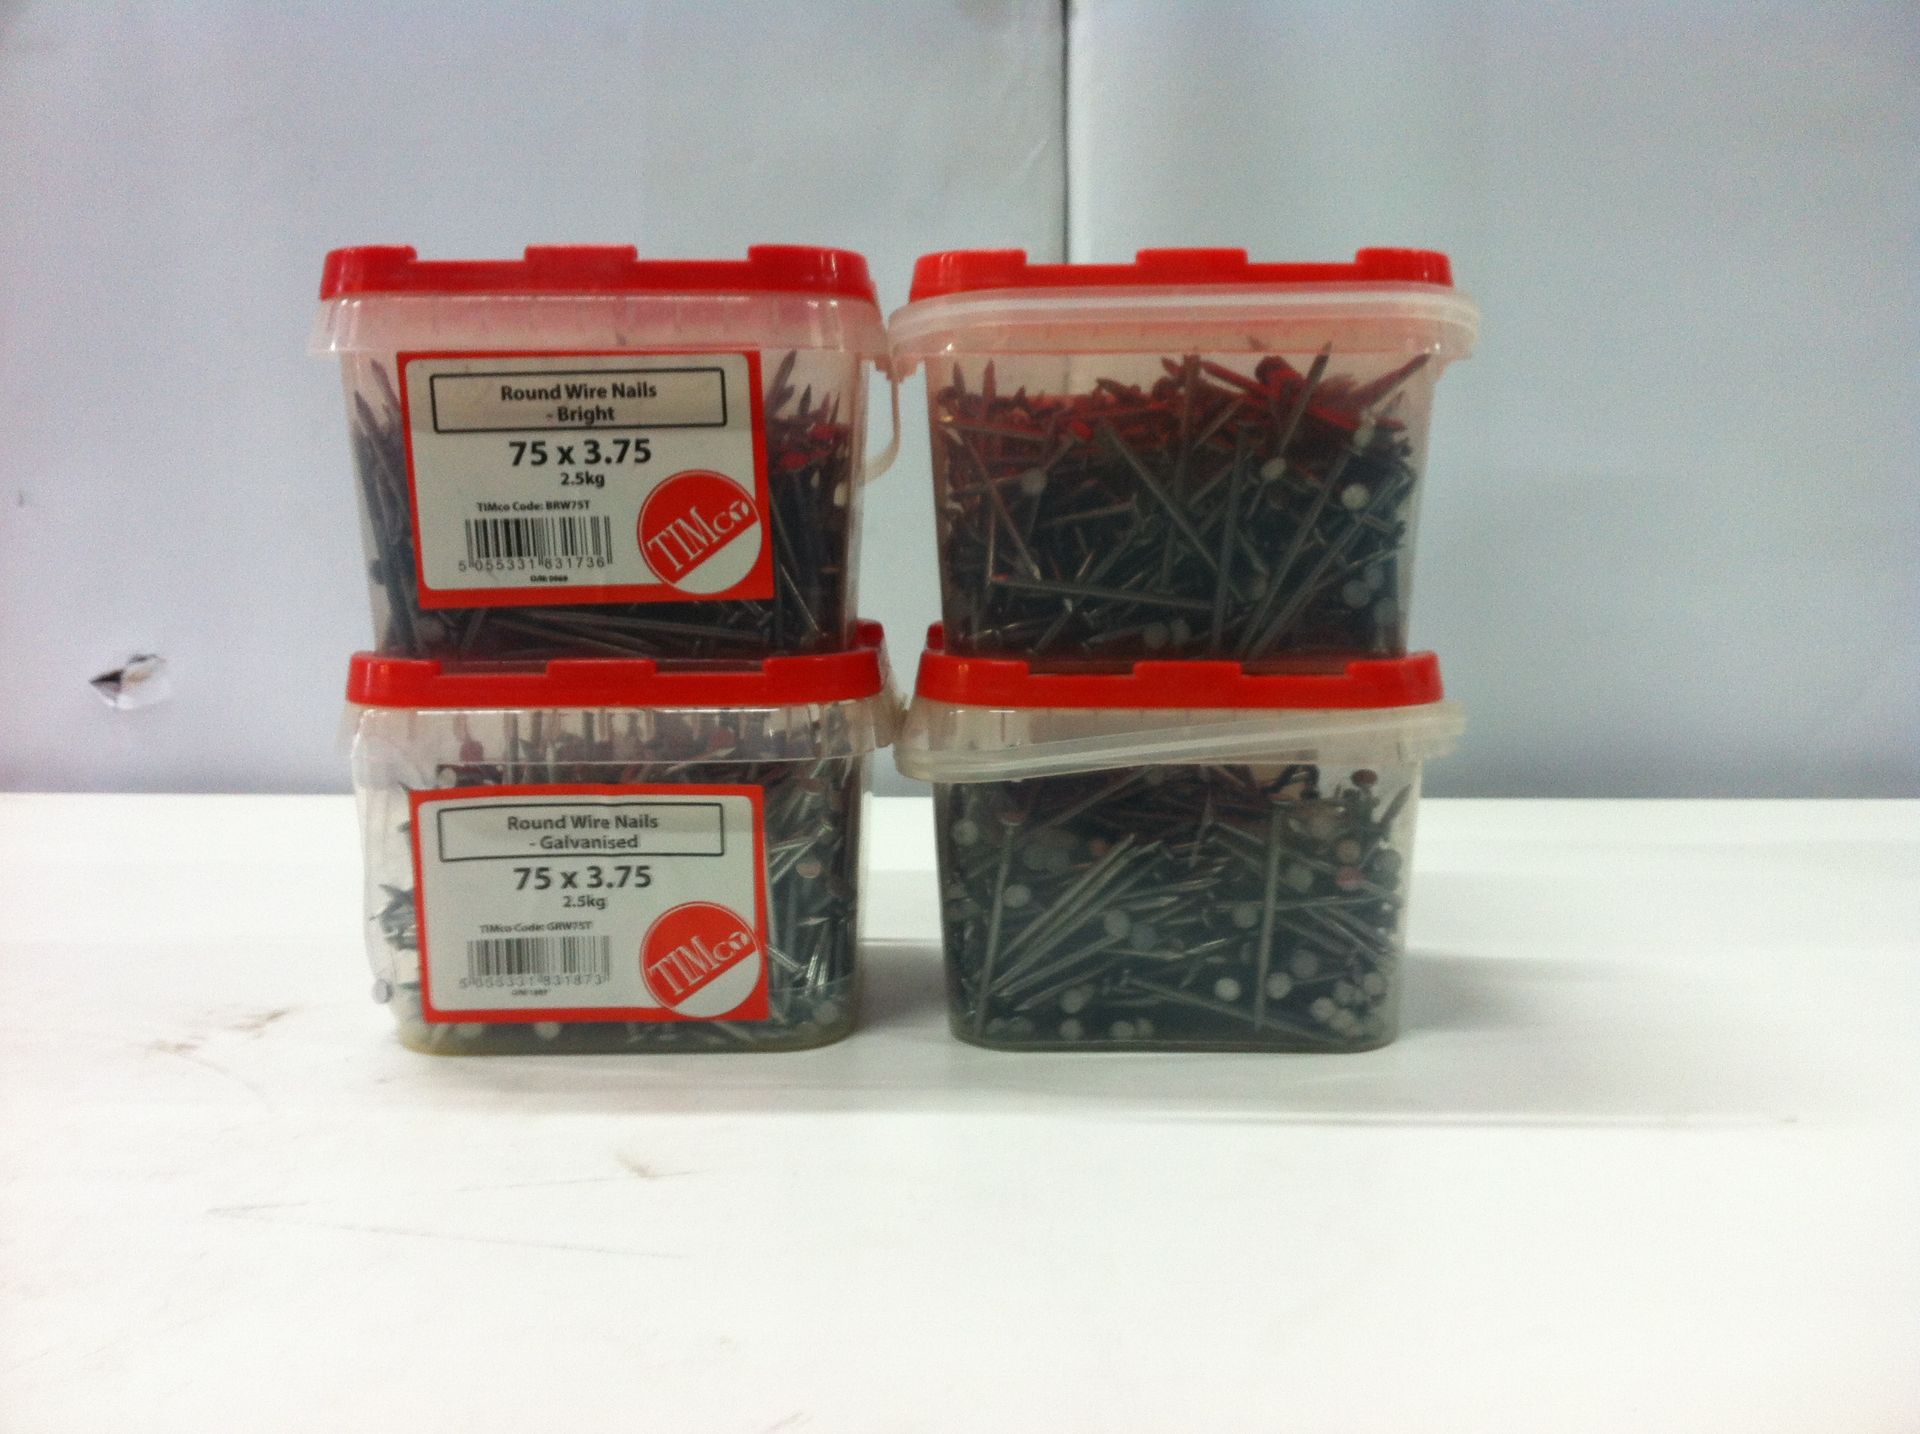 4 x 2.5kg Tubs of Timco Round Wire Nails - Size: 75 x 3.75